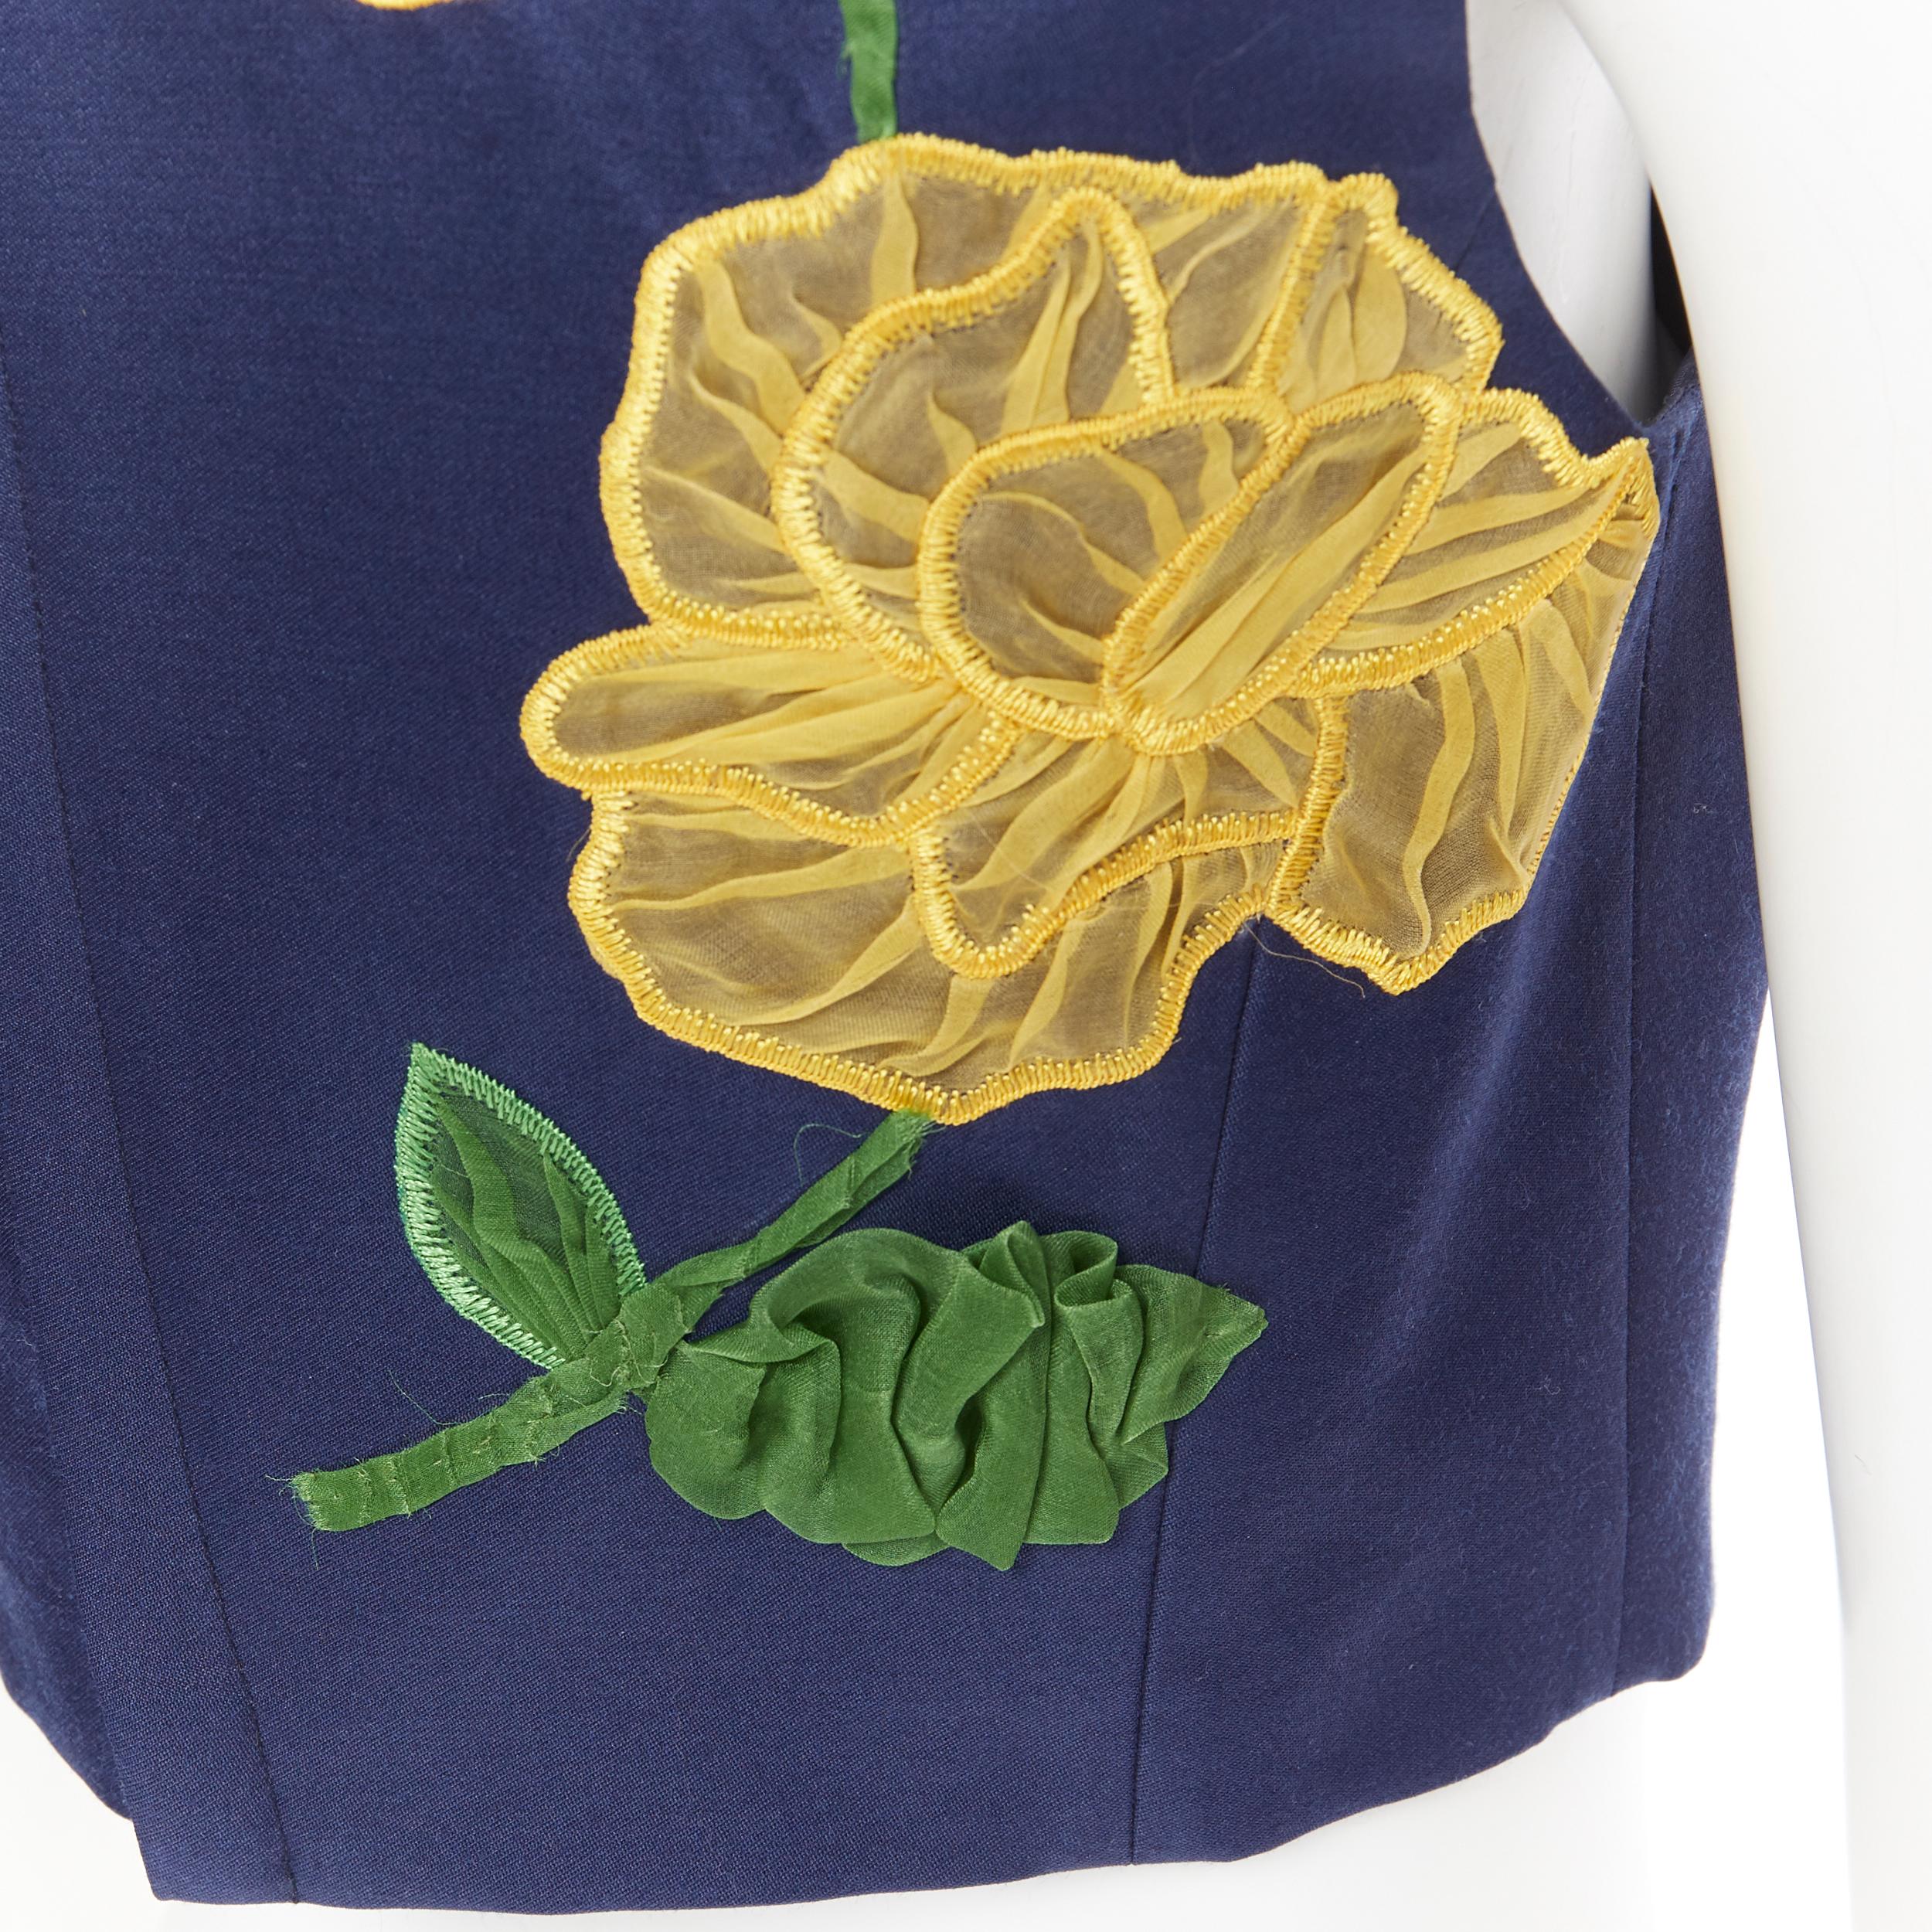 MICHAEL KORS COLLECTION wool silk navy yellow floral sleeveless cropped top US2 
Reference: LNKO/A01251 
Brand: Michael Kors 
Material: Wool 
Color: Navy 
Pattern: Floral 
Closure: Zip 
Extra Detail: Yellow floral applique. Cropped fit. Fully lined.